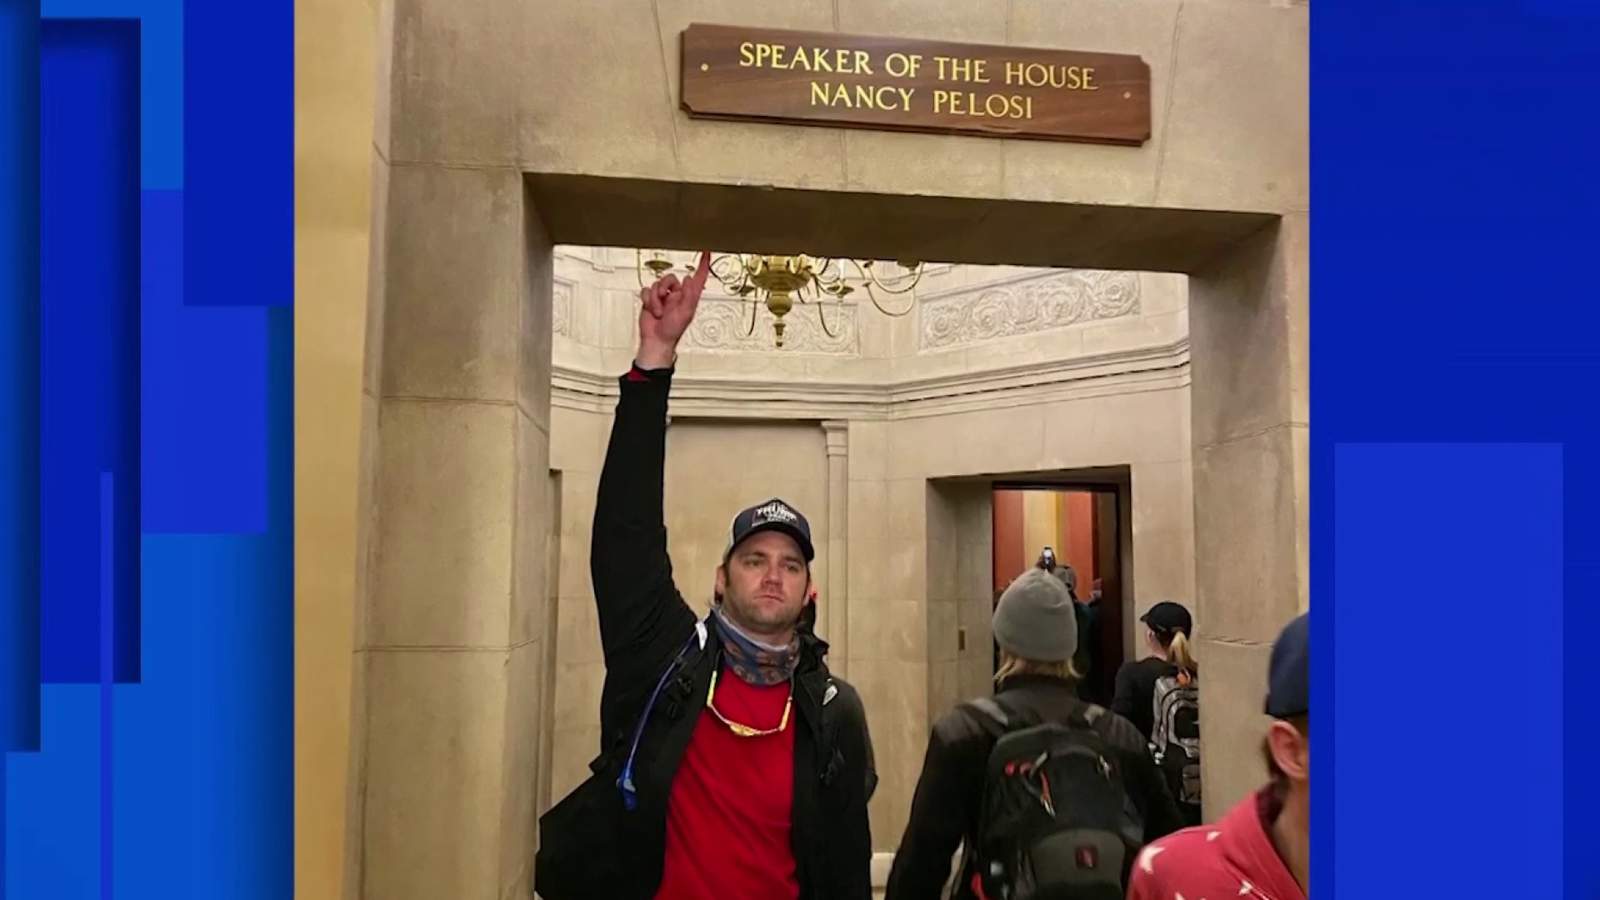 Investigation launched after photo shows Sanford firefighter inside Capitol during riot